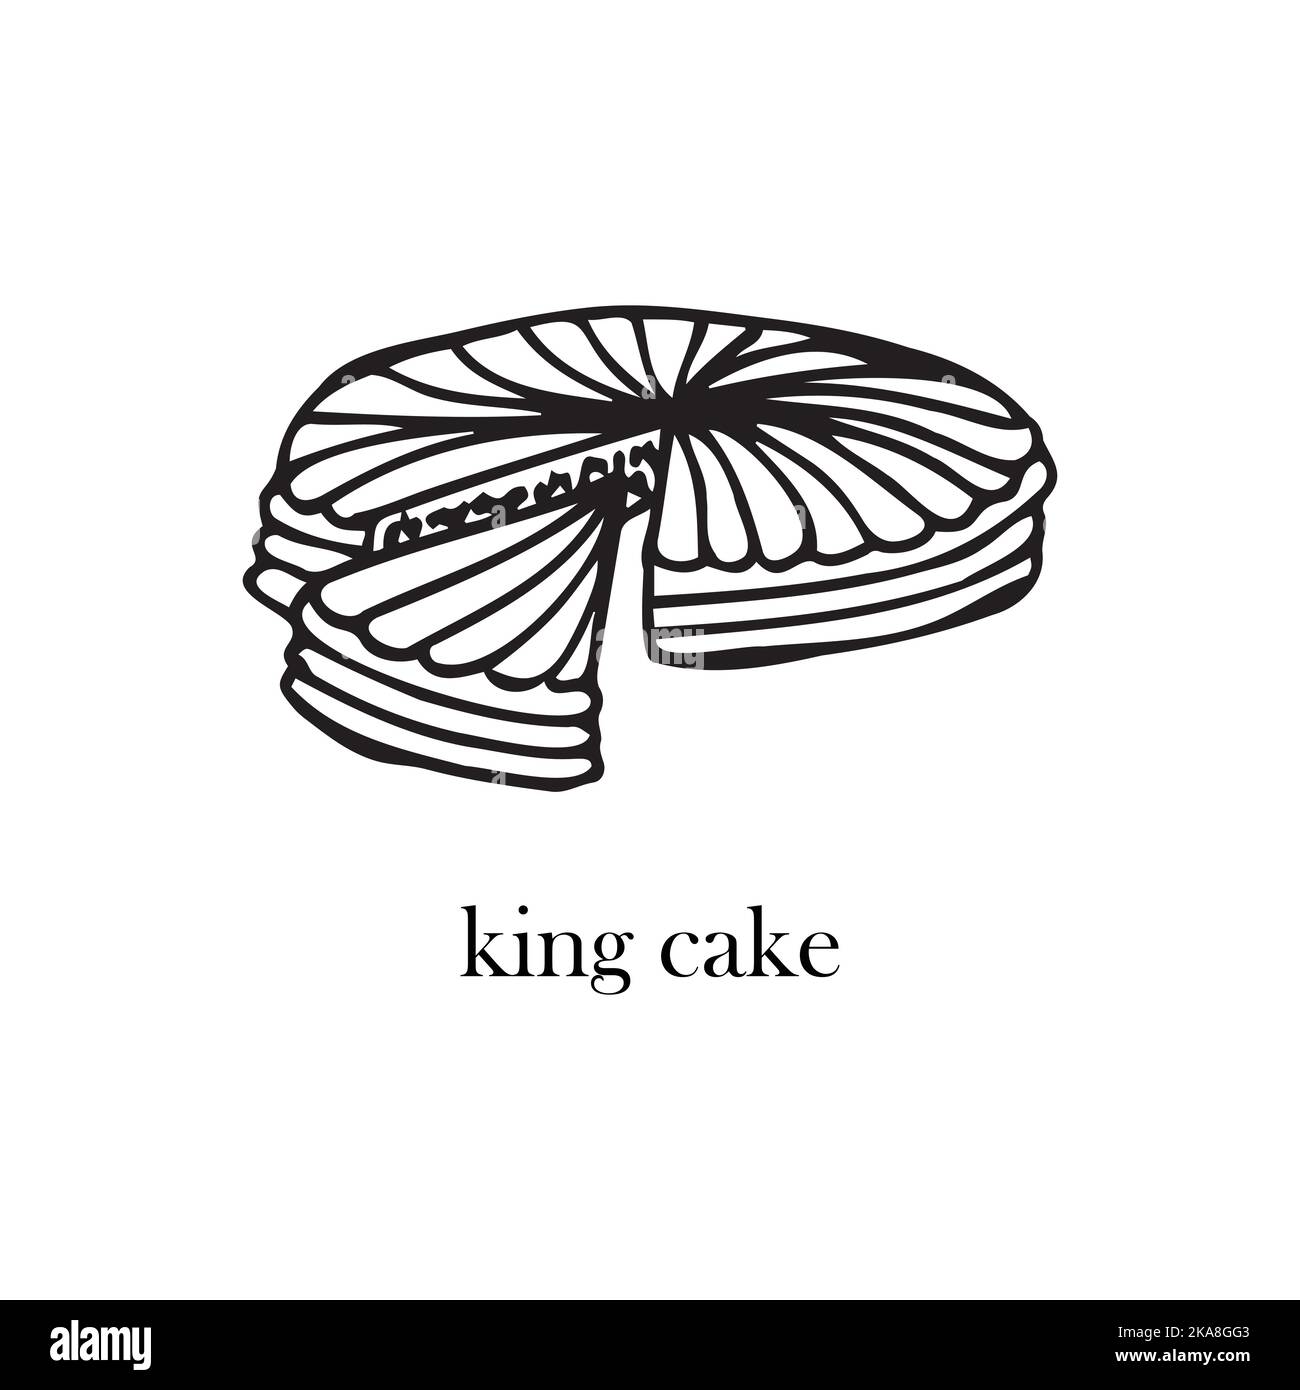 Vector illustration of a French dish - king cake. Dishes for Christmas and New Year. Stock Vector